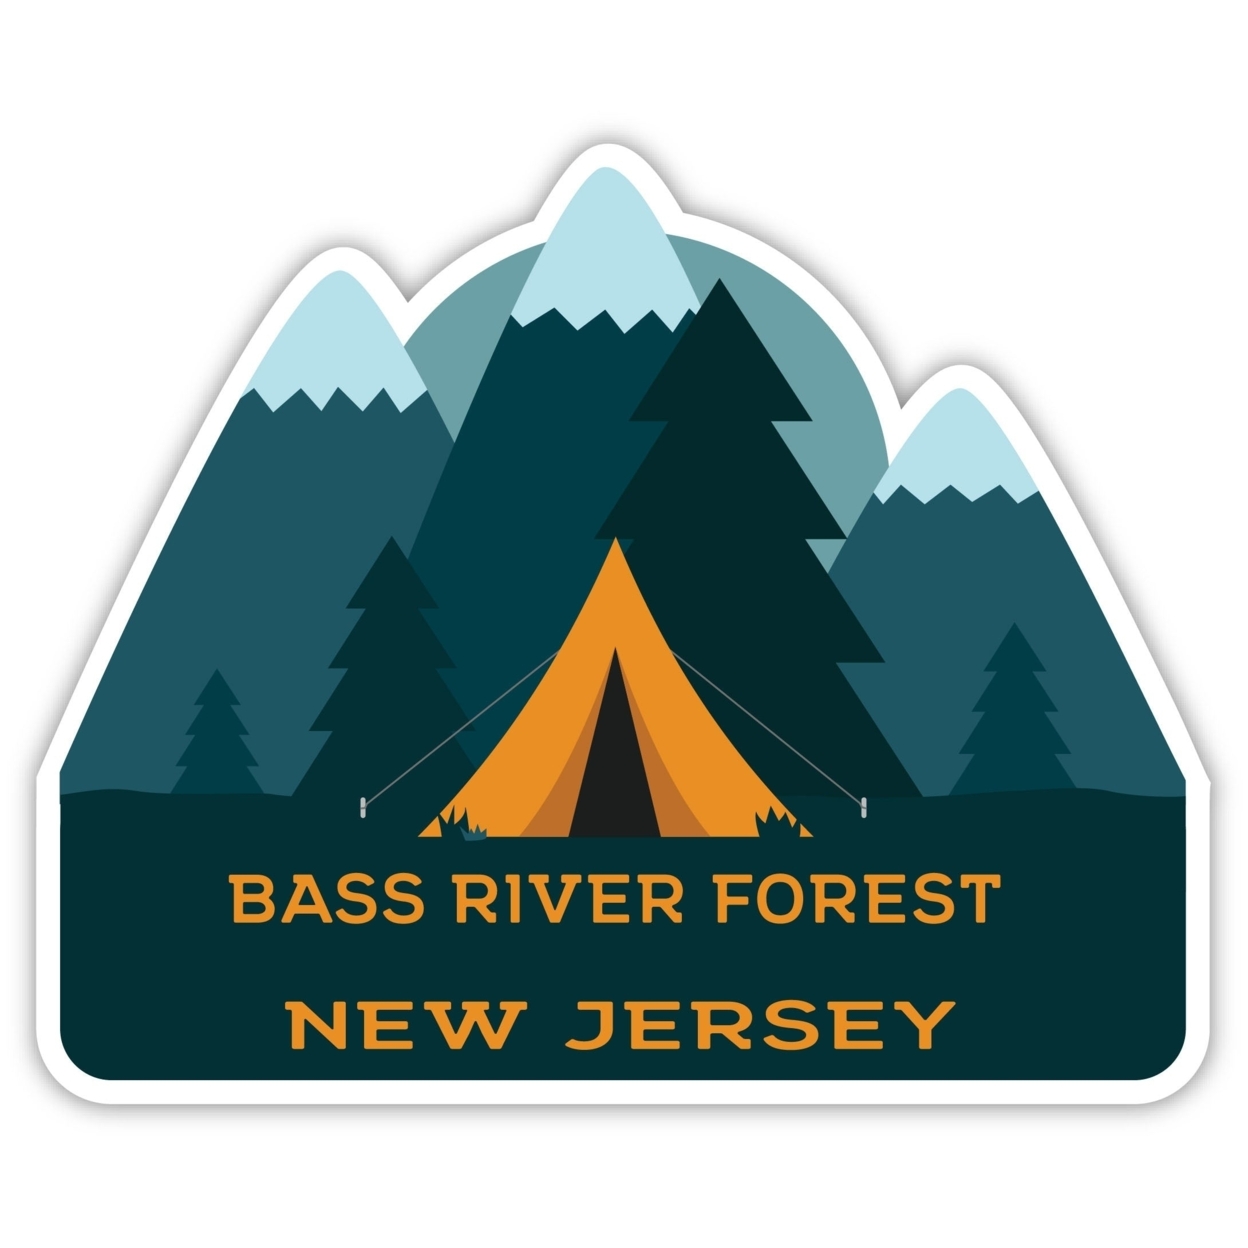 Bass River Forest New Jersey Souvenir Decorative Stickers (Choose Theme And Size) - Single Unit, 4-Inch, Tent